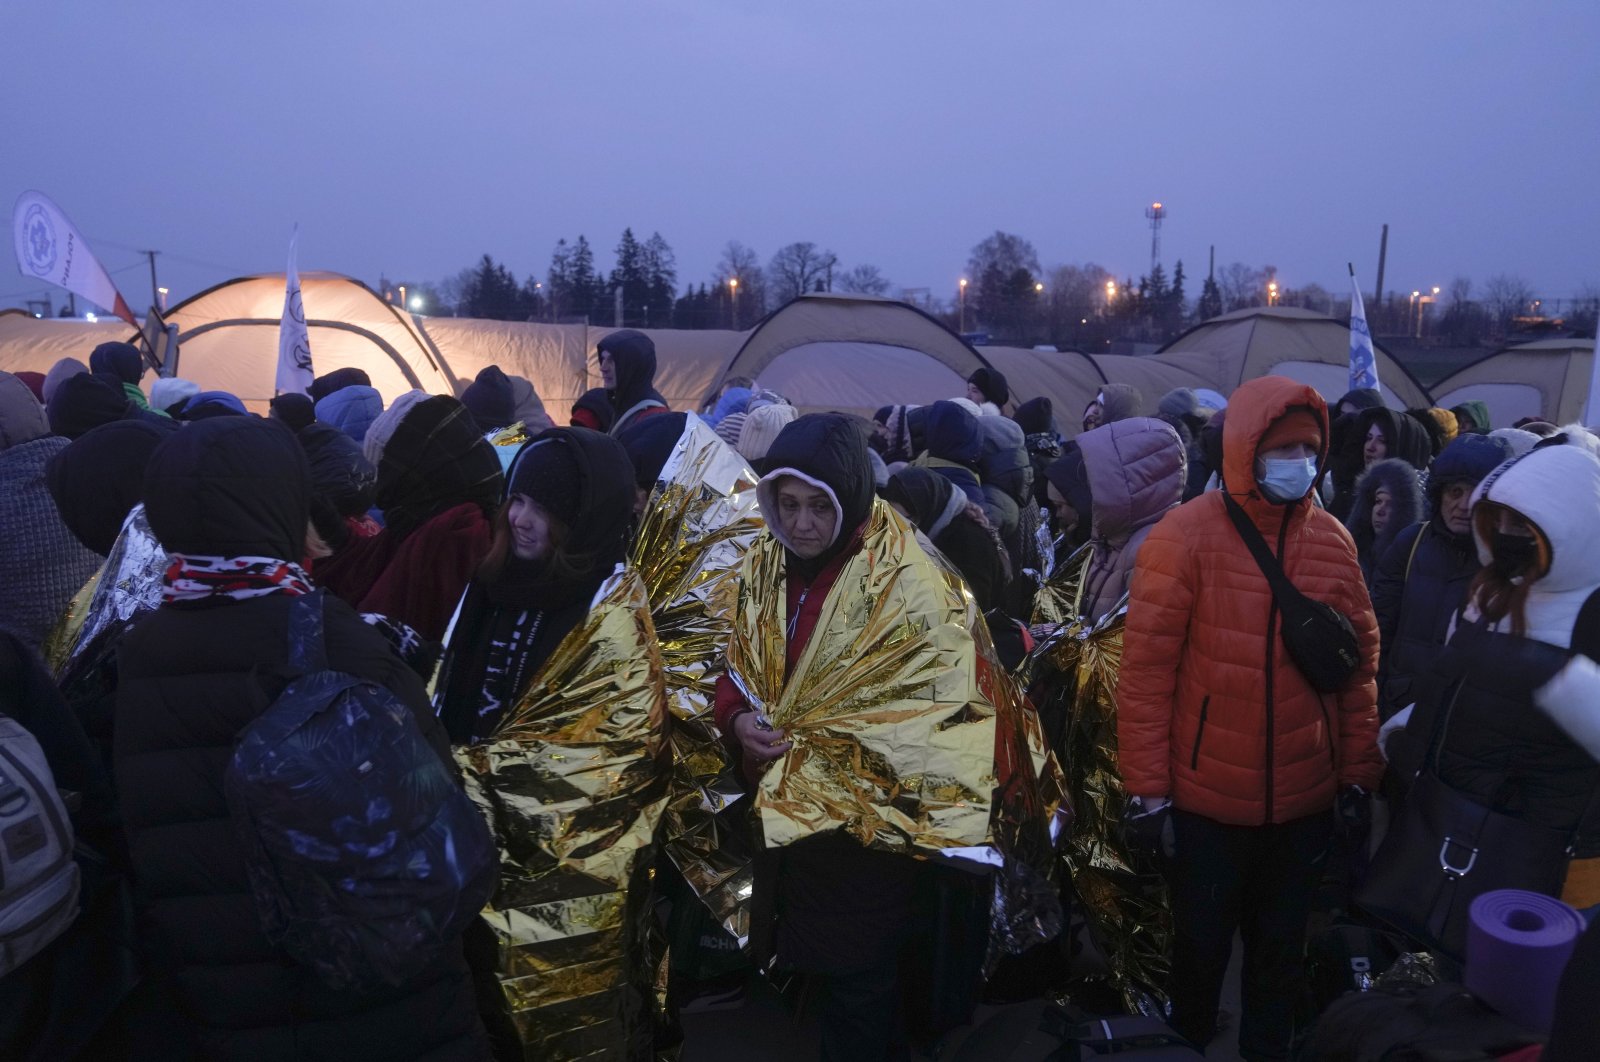 Refugees wait in a crowd for transportation after fleeing from Ukraine and arriving at the border crossing in Medyka, Poland, March 7, 2022. (AP Photo)